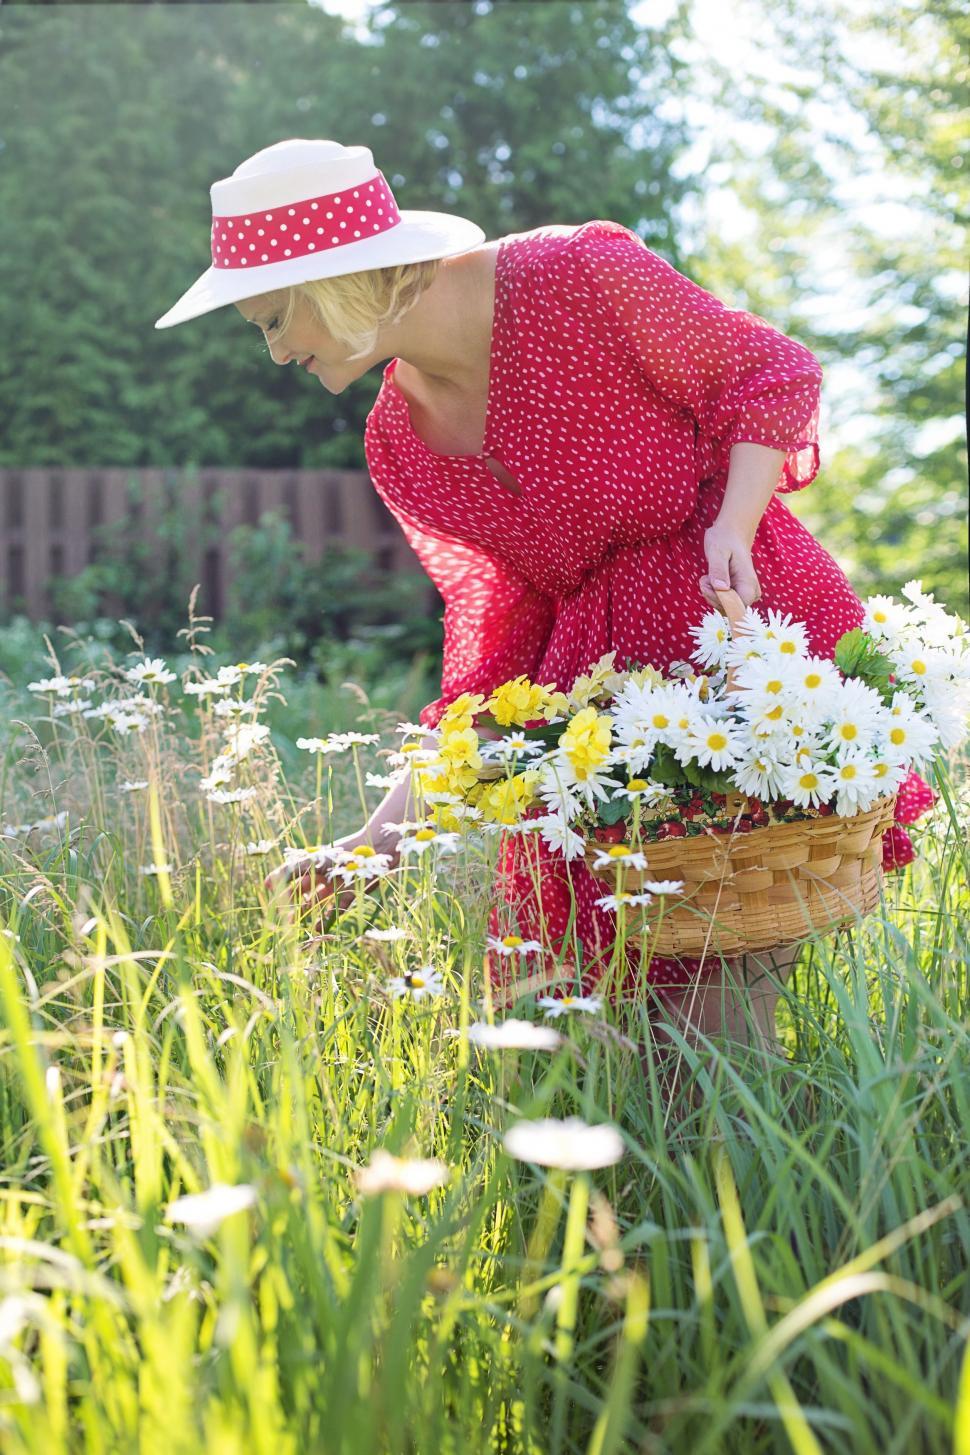 Free Image of Woman in Red Dress With Hat in Daisy Flower Field 